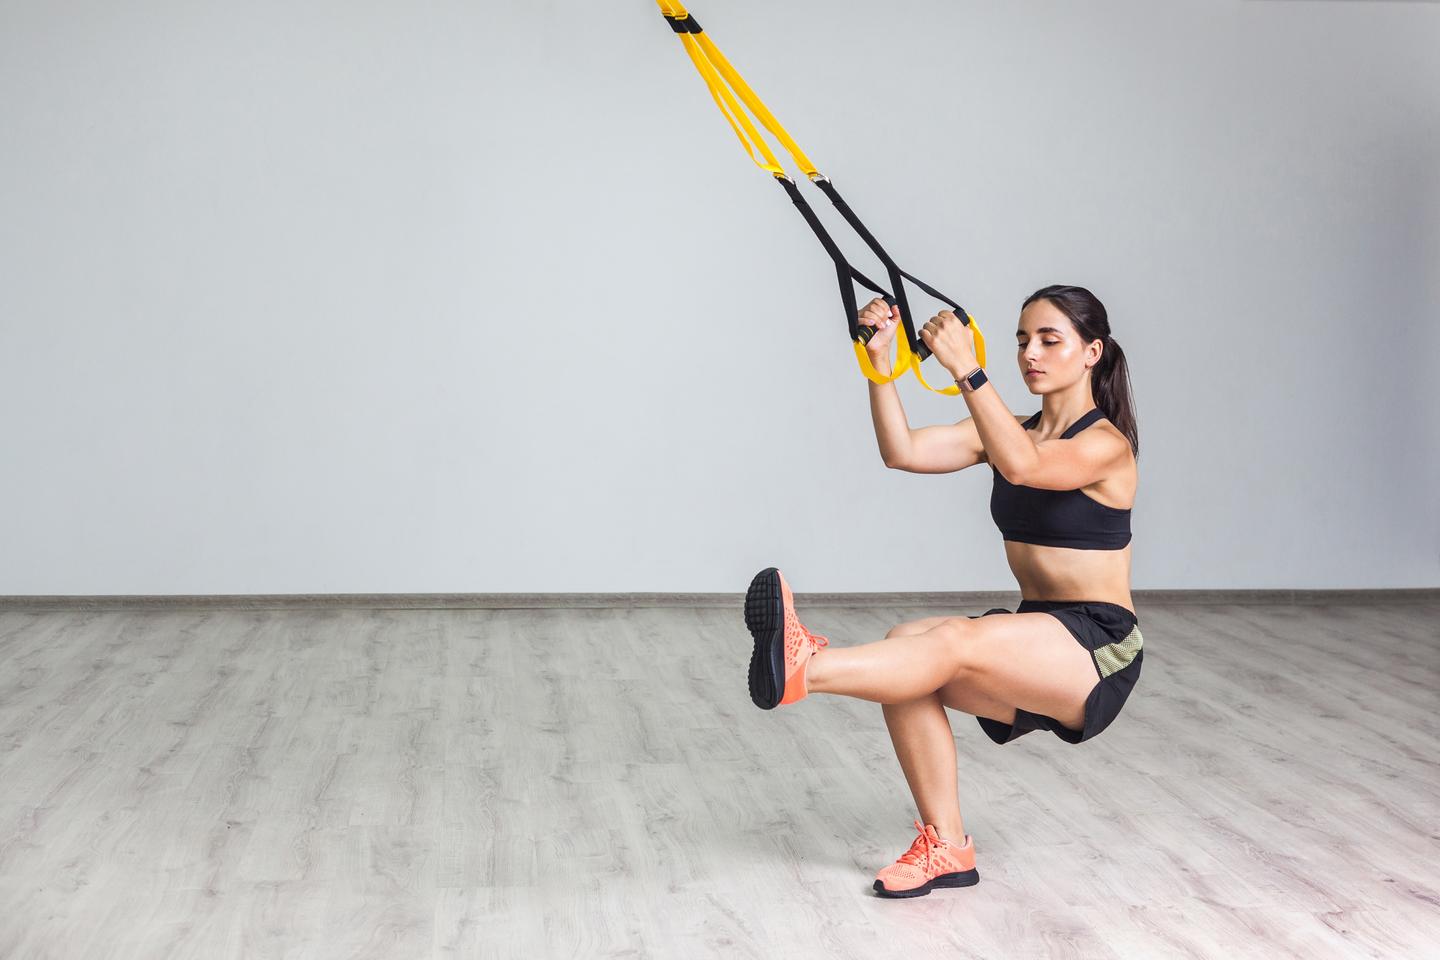 ISSA, International Sports Sciences Association, Certified Personal Trainer, ISSAonline, How to Master the Single-Leg Squat (Pistol Squat), TRX